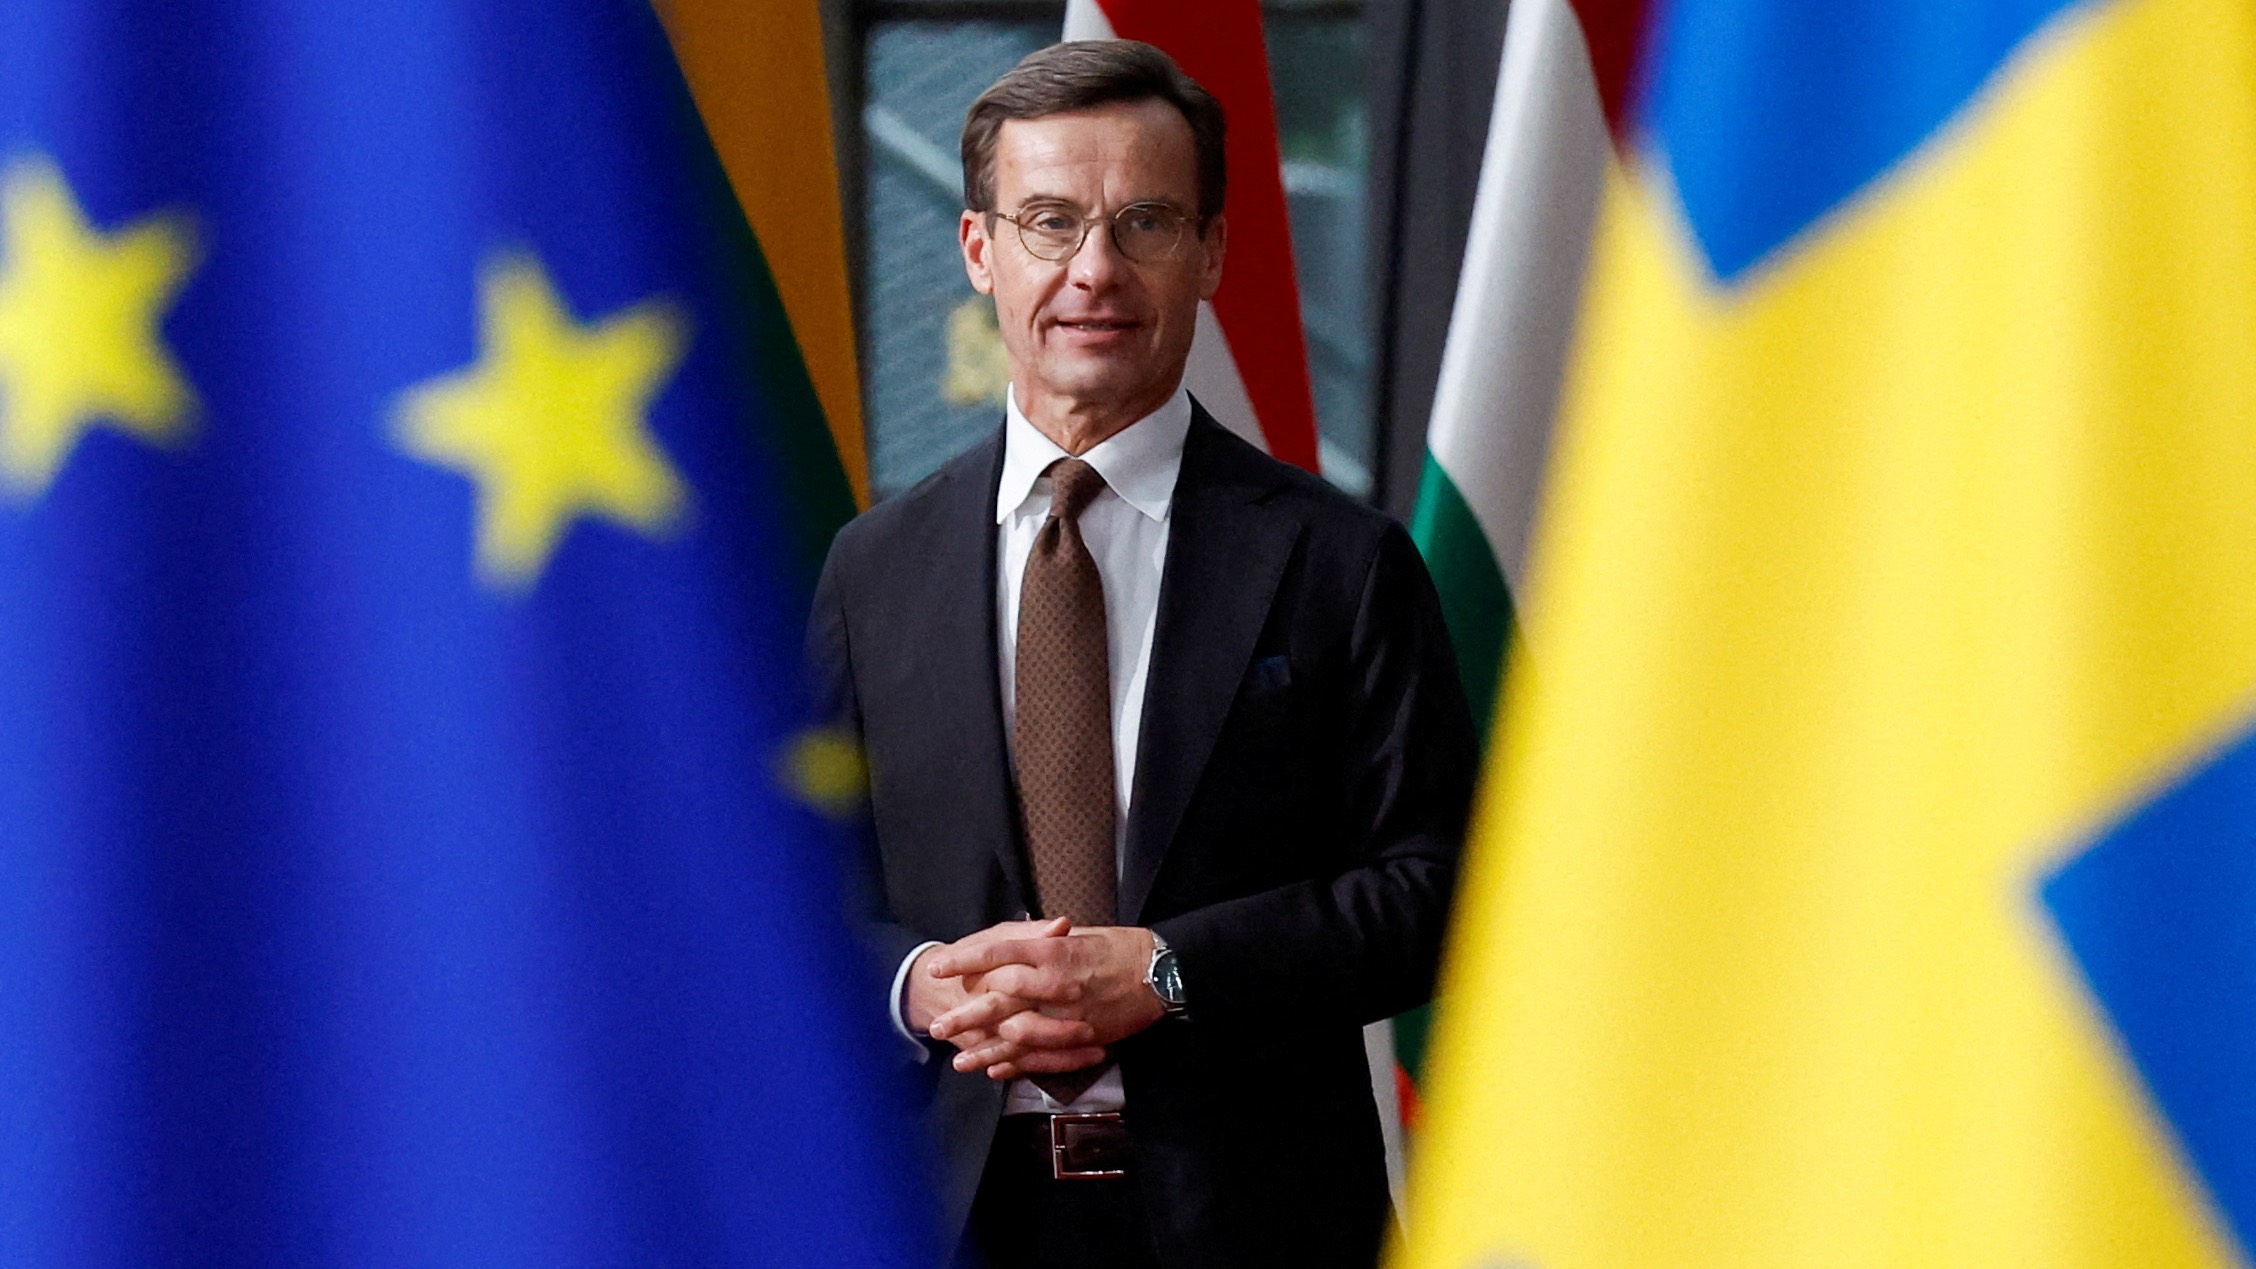 Swedish Prime Minister Ulf Kristersson, whose country hasn't always been at the heart of the push toward European unity. /Piroschka van de Wouw/Reuters